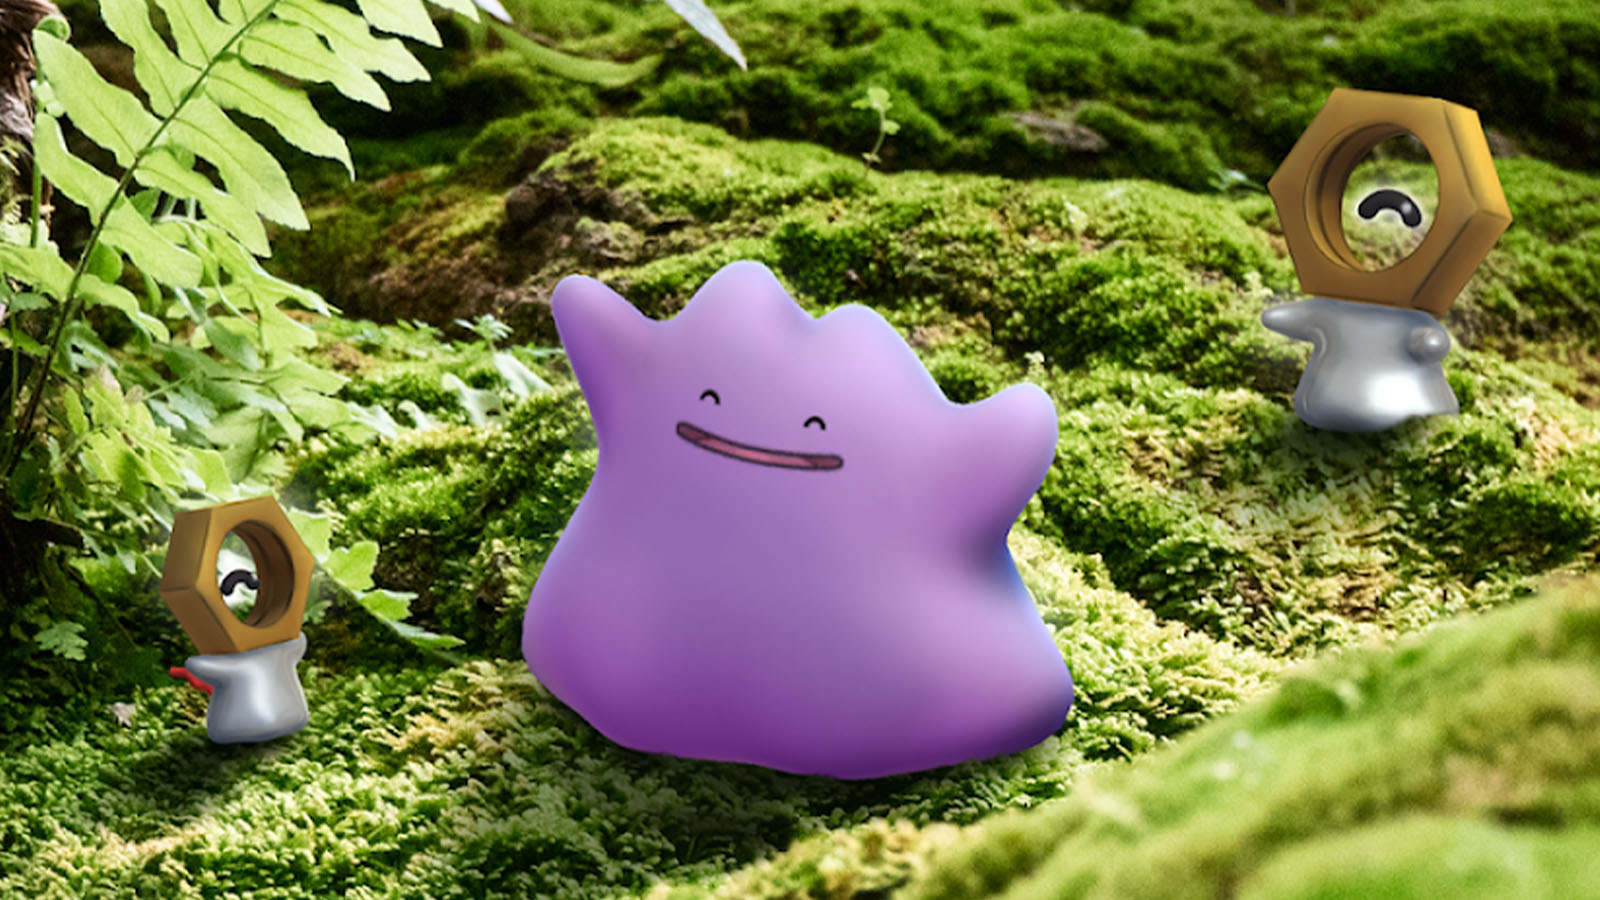 Have heard about this information of '' Ditto before ? wait a